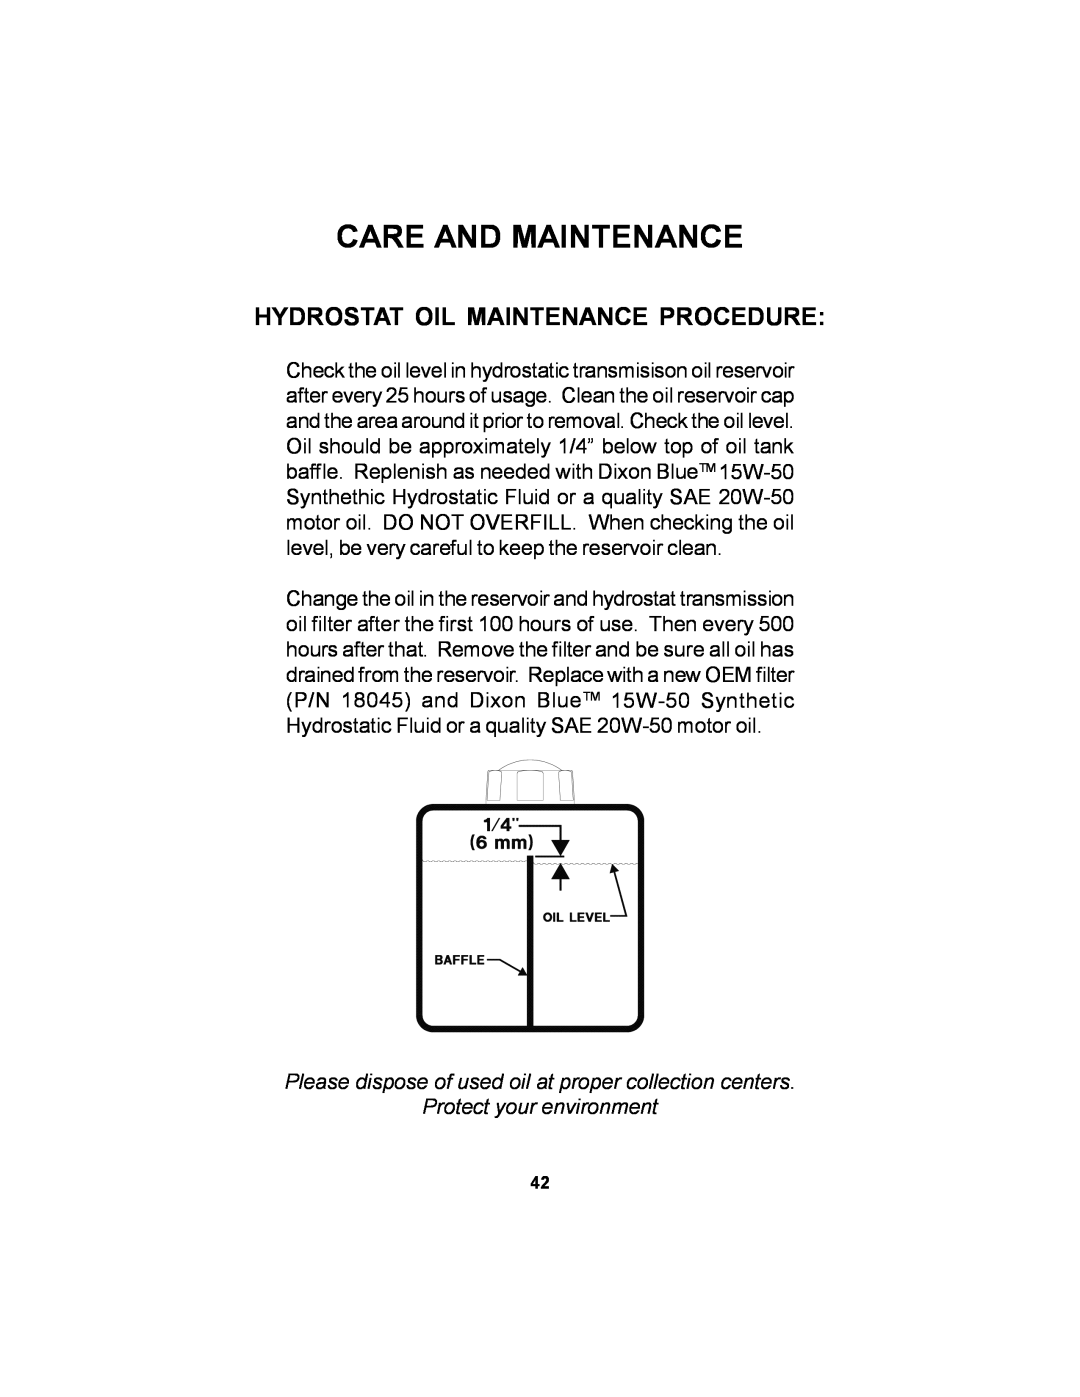 Dixon 11249-106 manual Hydrostat Oil Maintenance Procedure, Care And Maintenance, Protect your environment 